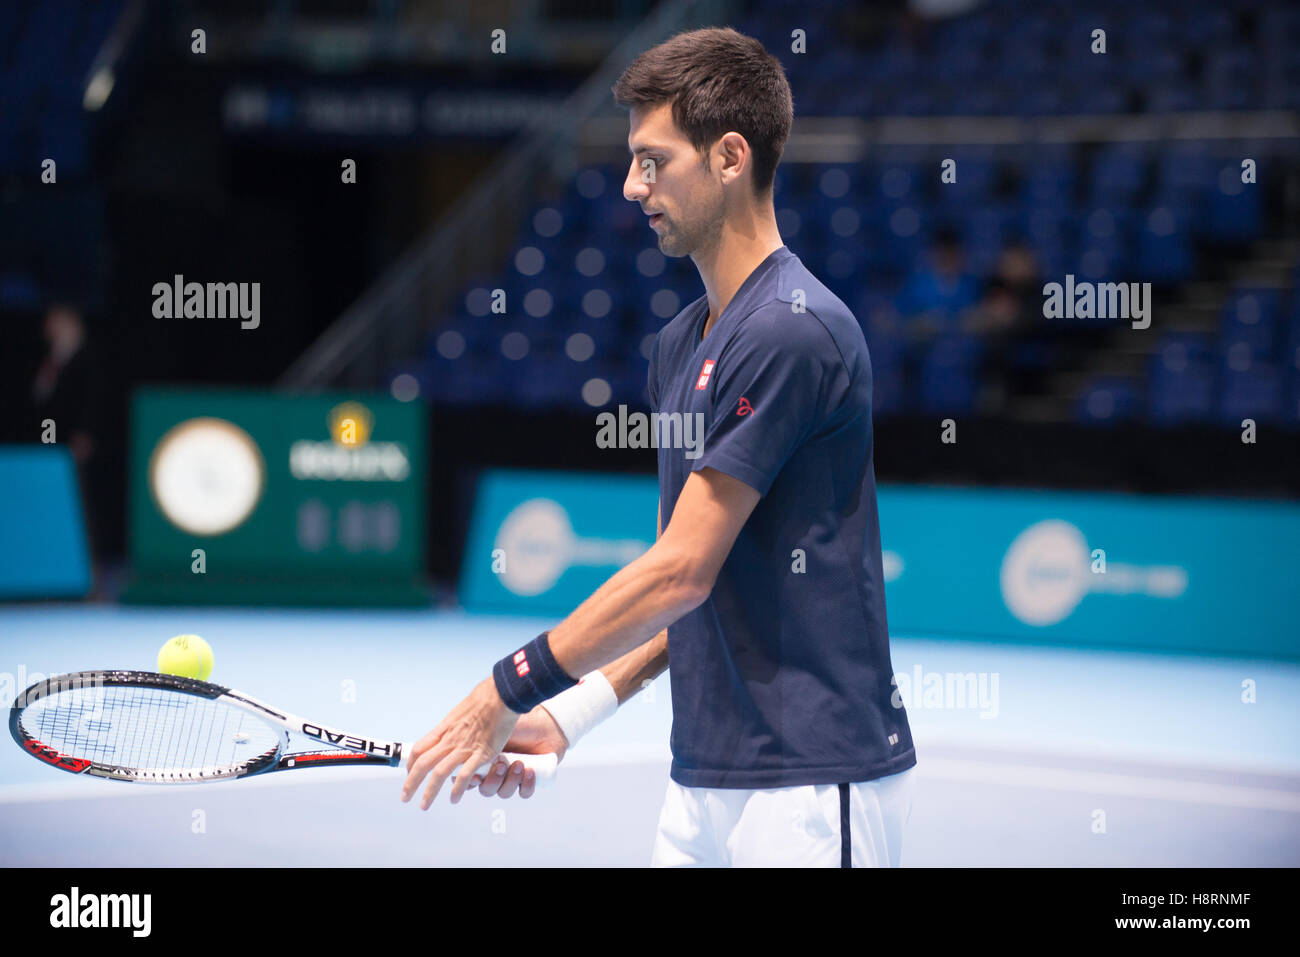 London, UK. 15th Nov, 2016. Novak Djokovic practice, with Boris Becker  during a practice game. Novak Djokovic is a Serbian professional tennis  player. He is considered one of the greatest tennis players